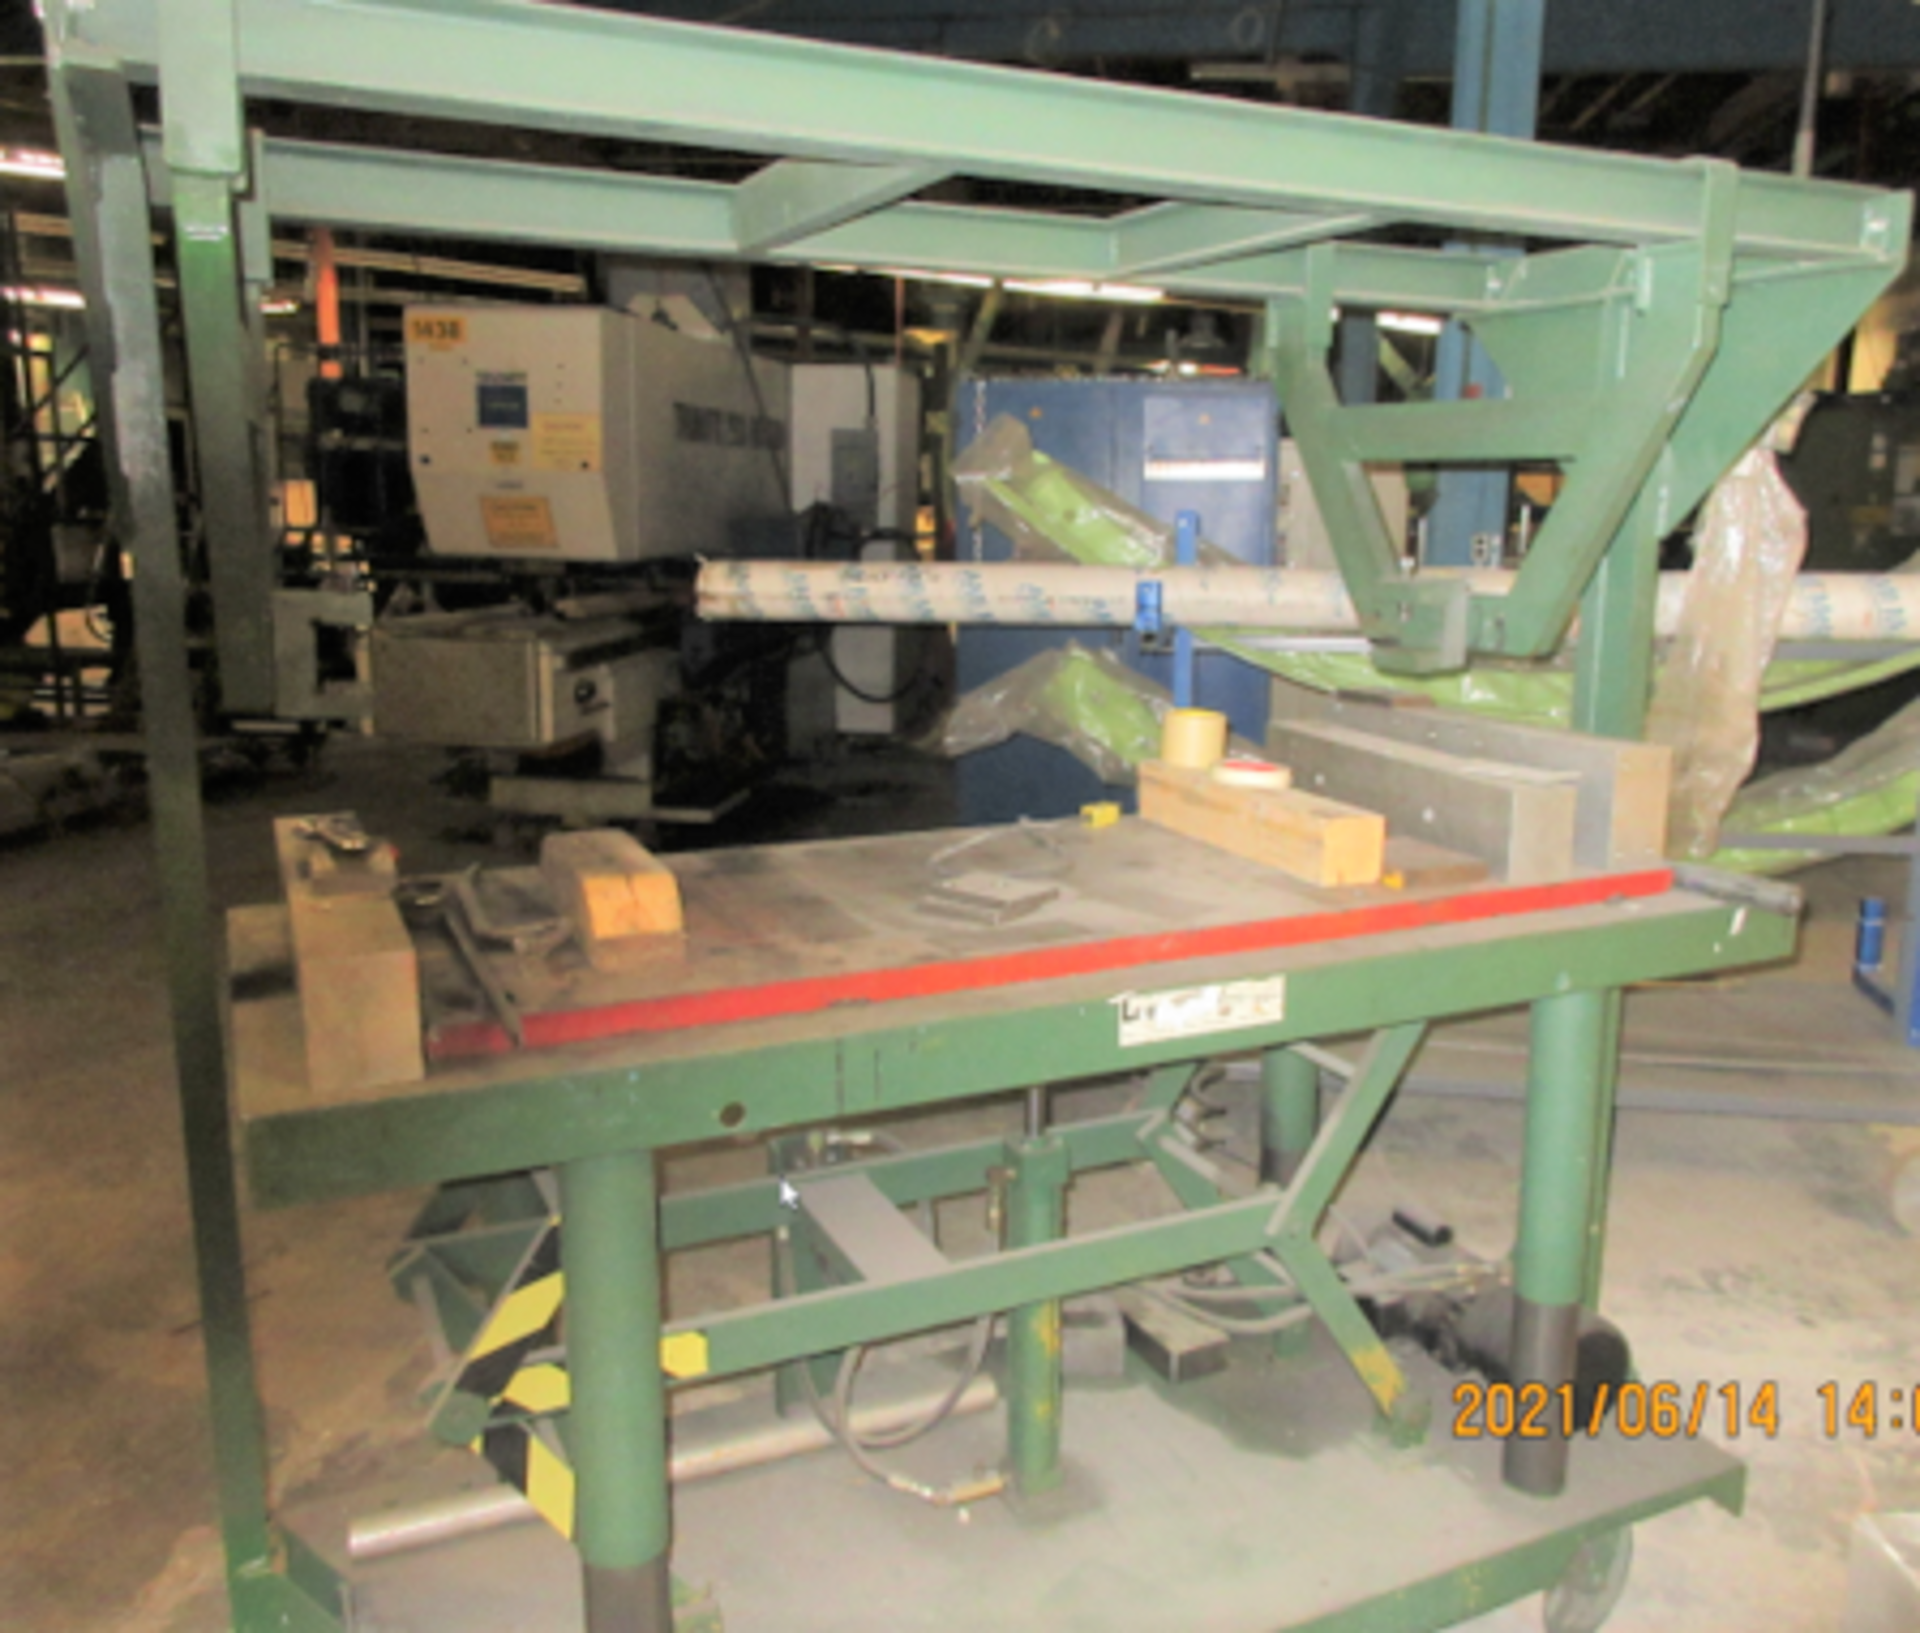 Lexico Die Separator, Model Special-06836, Hydraulic Lift, 5' x 2' Table, LOCATION, OTTAWA, ONTARIO - Image 2 of 2